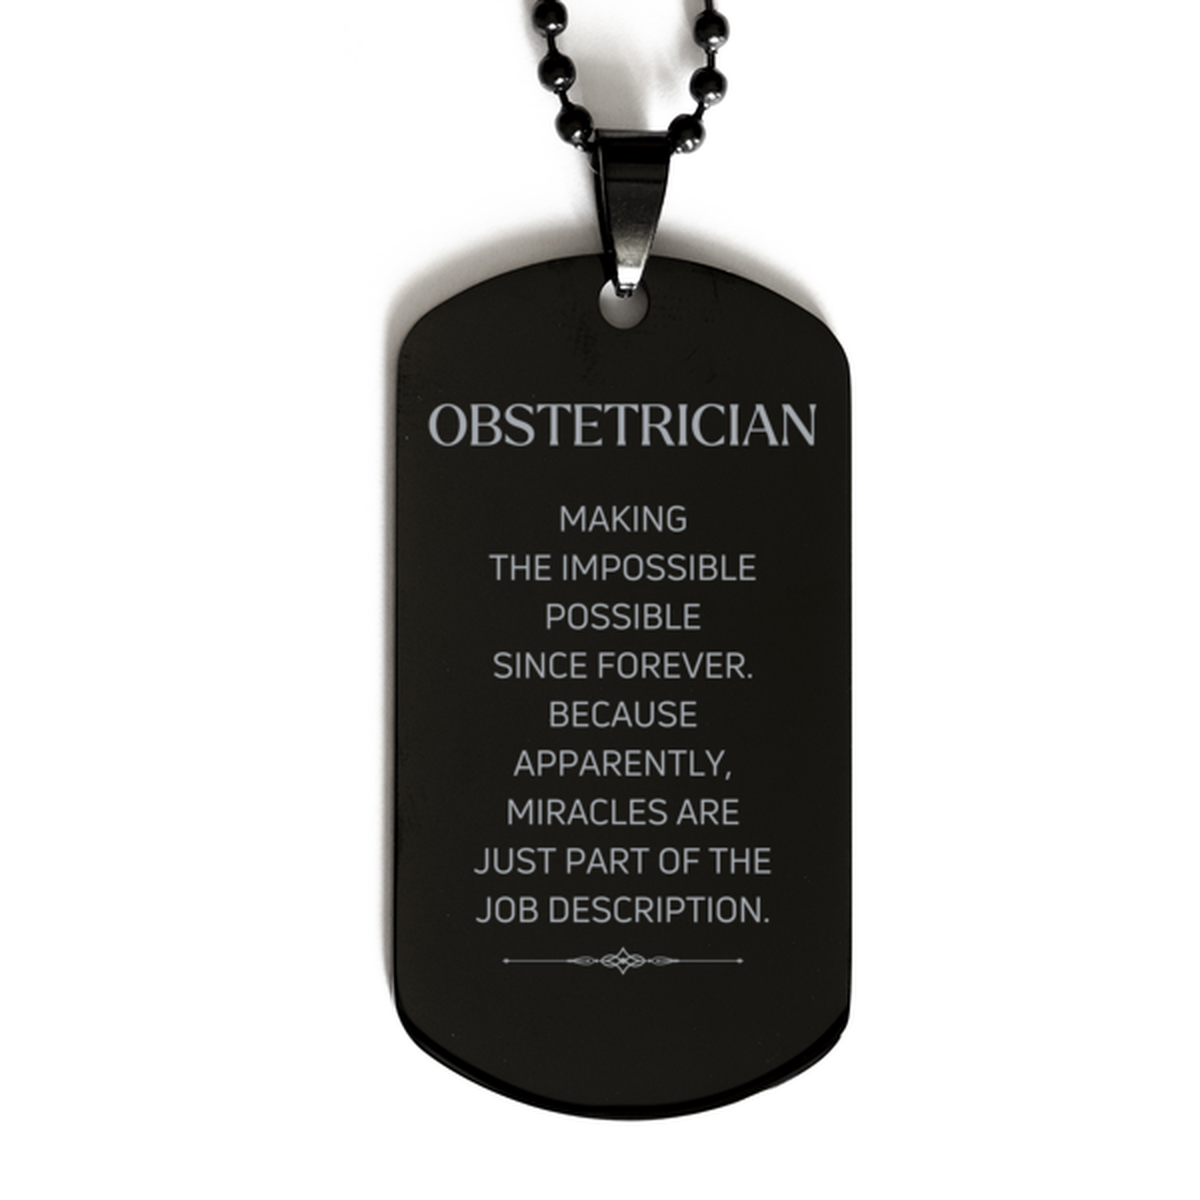 Funny Obstetrician Gifts, Miracles are just part of the job description, Inspirational Birthday Black Dog Tag For Obstetrician, Men, Women, Coworkers, Friends, Boss